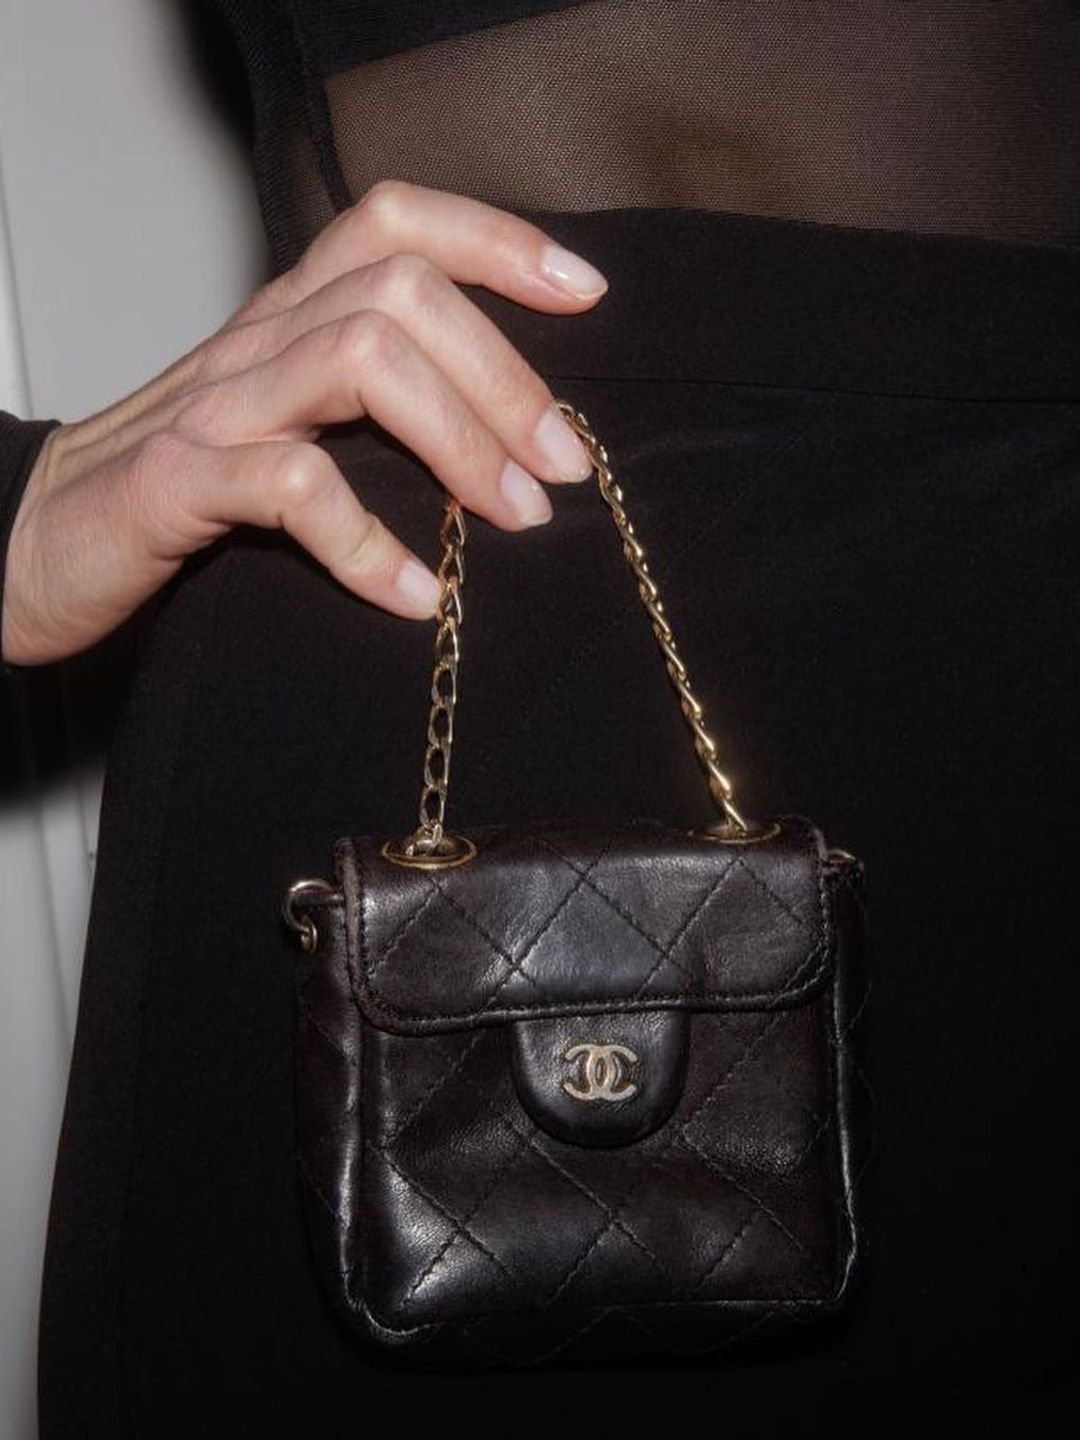 Mollie donned a vintage Chanel bag for the occasion